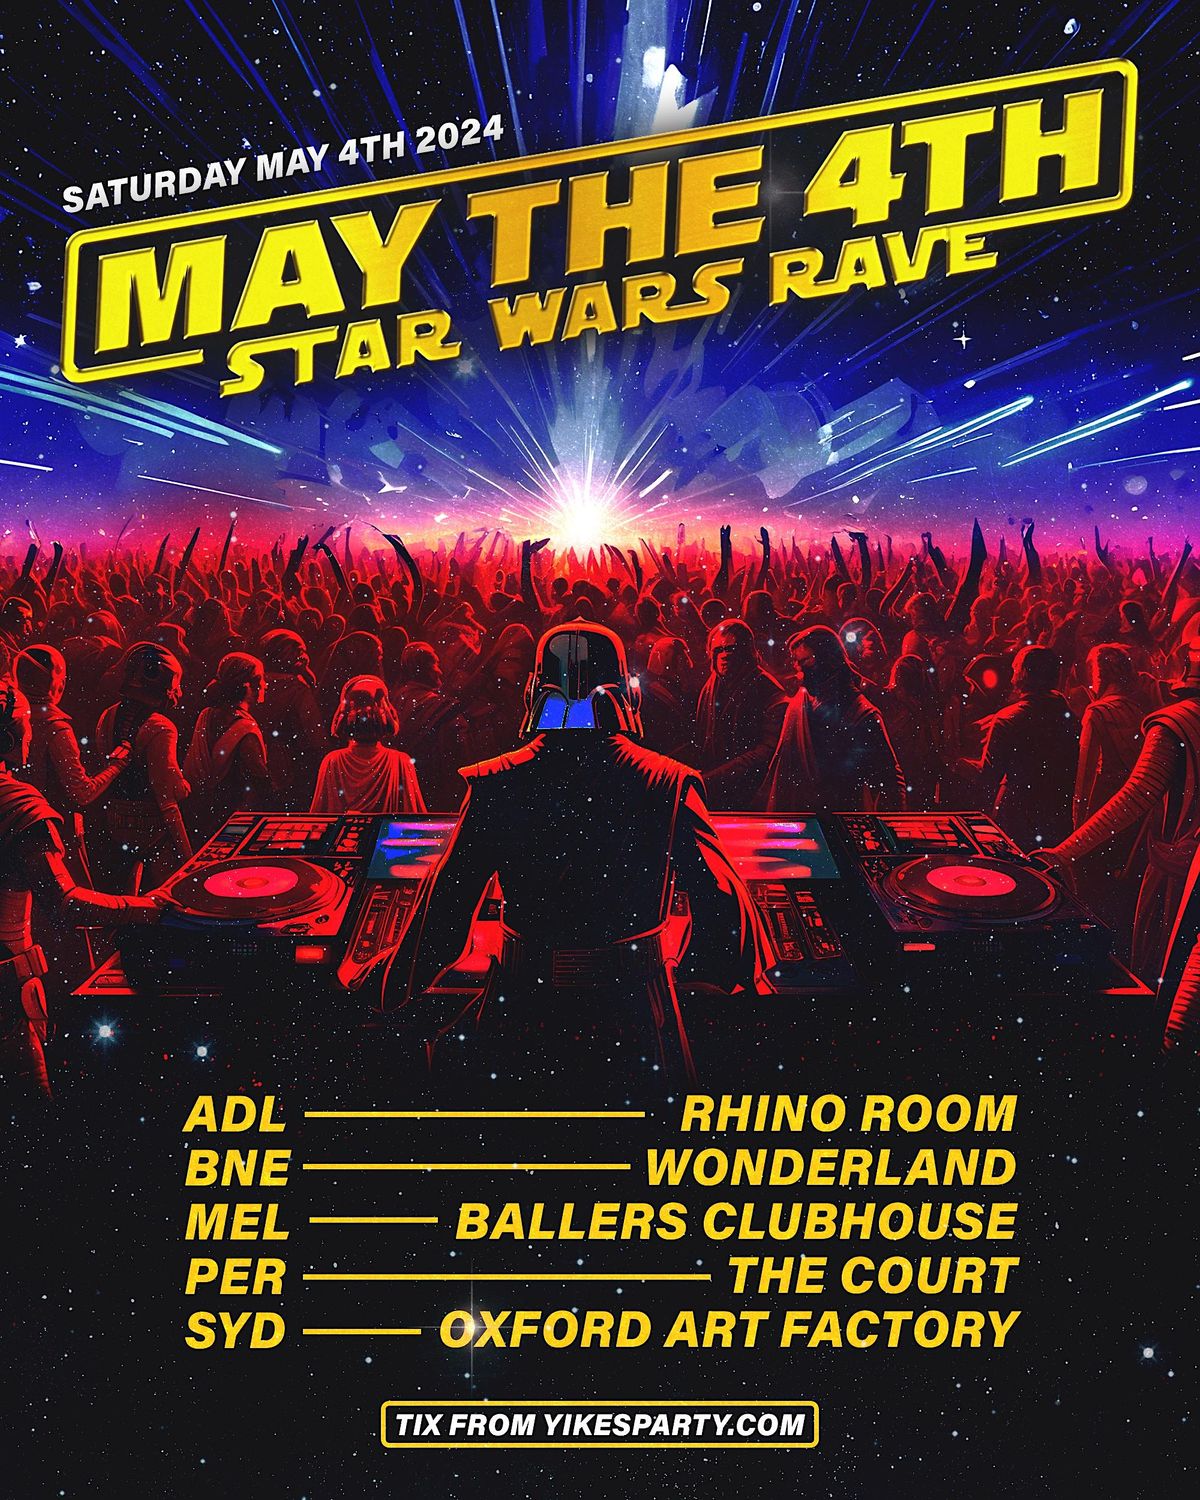 May the 4th - Star Wars Rave Adelaide